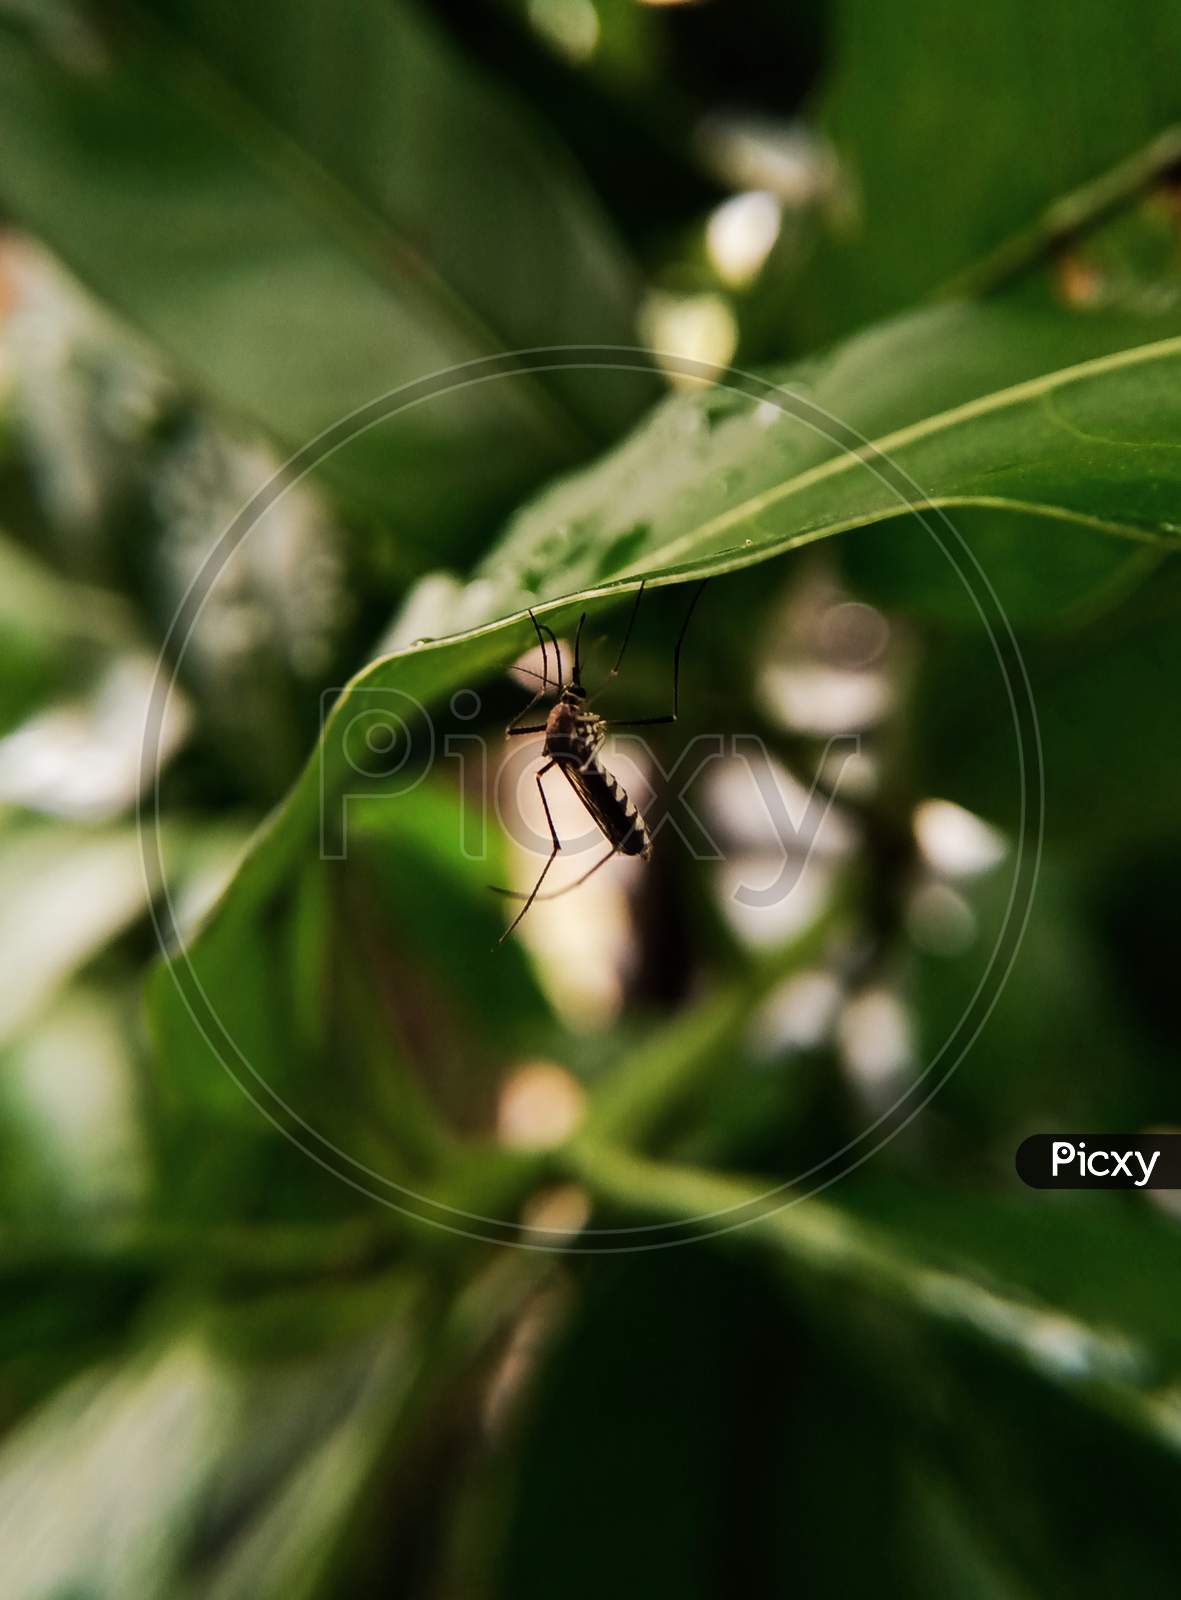 Mosquito on the leaf.